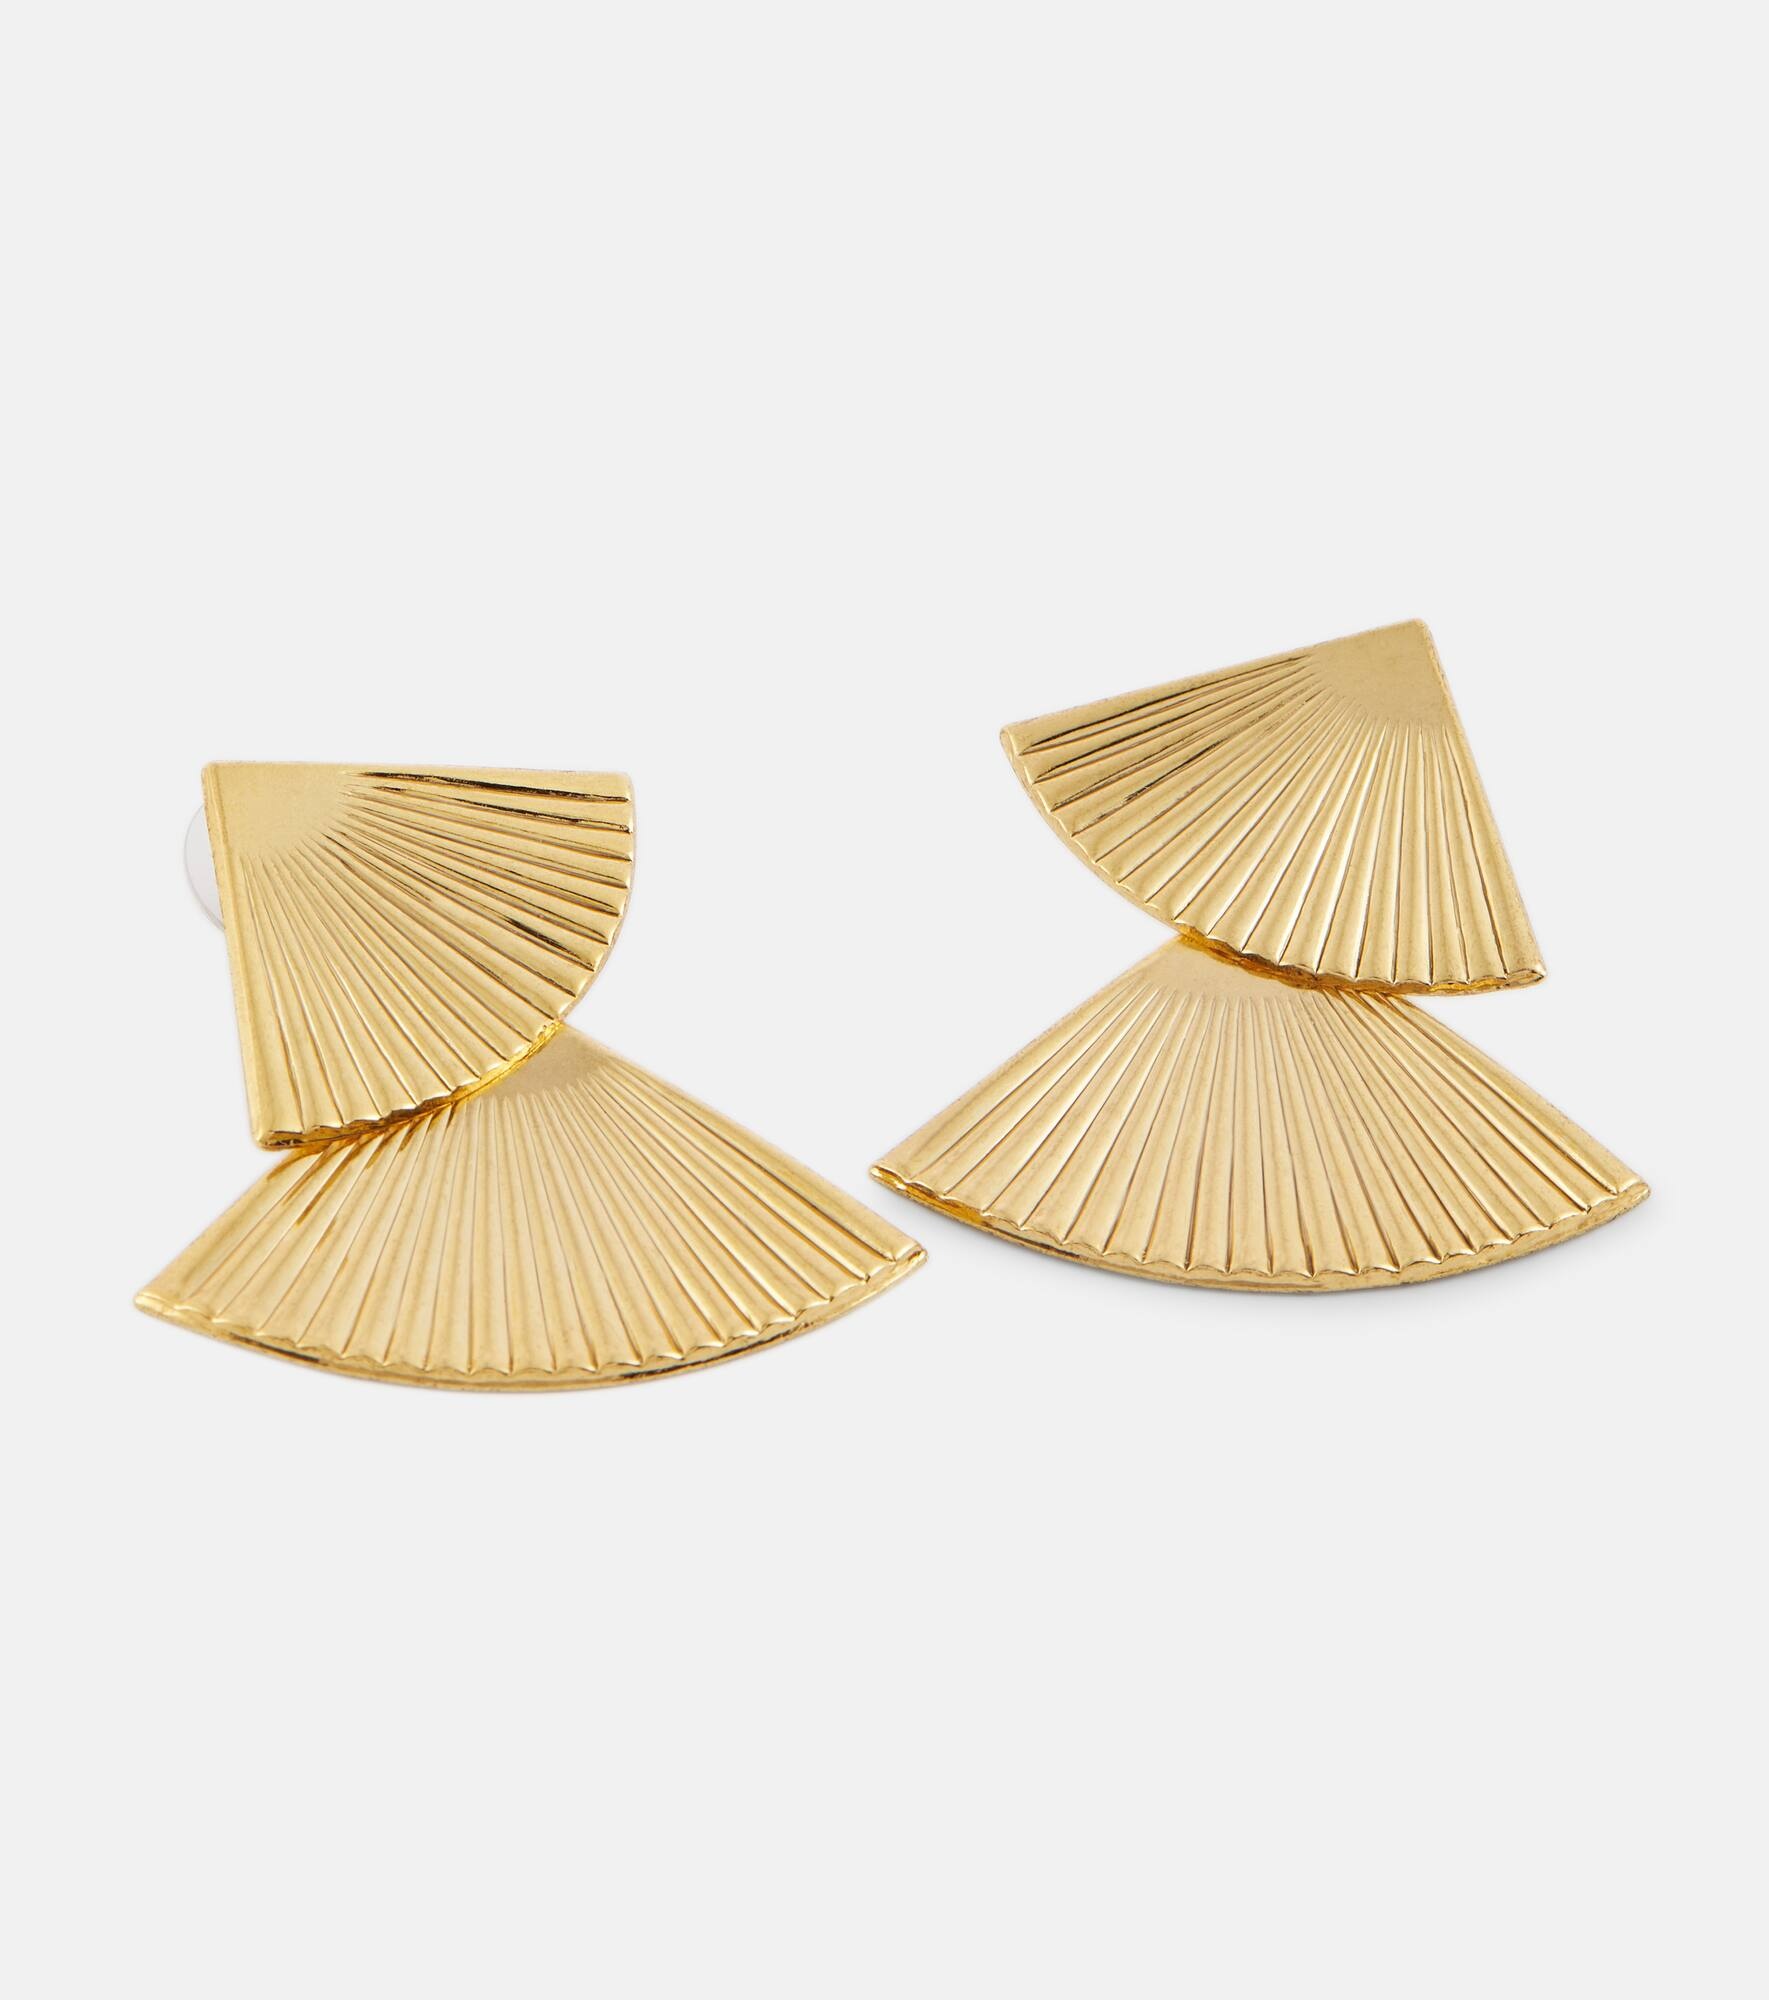 Vanna gold-plated earrings - 4